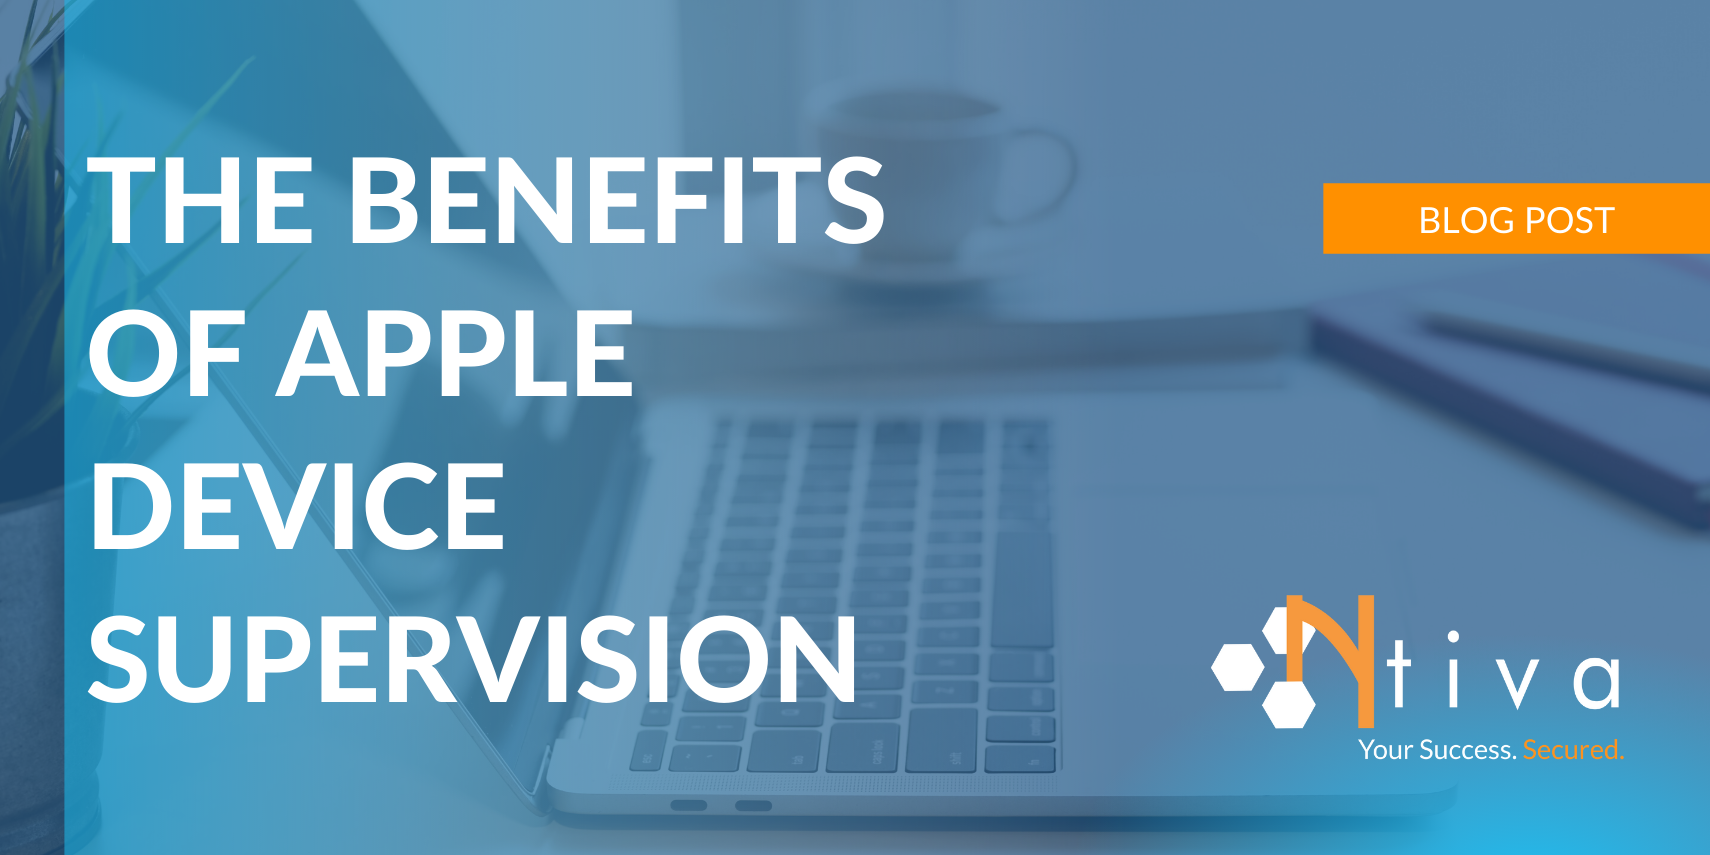 The Top Benefits of Apple Device Supervision